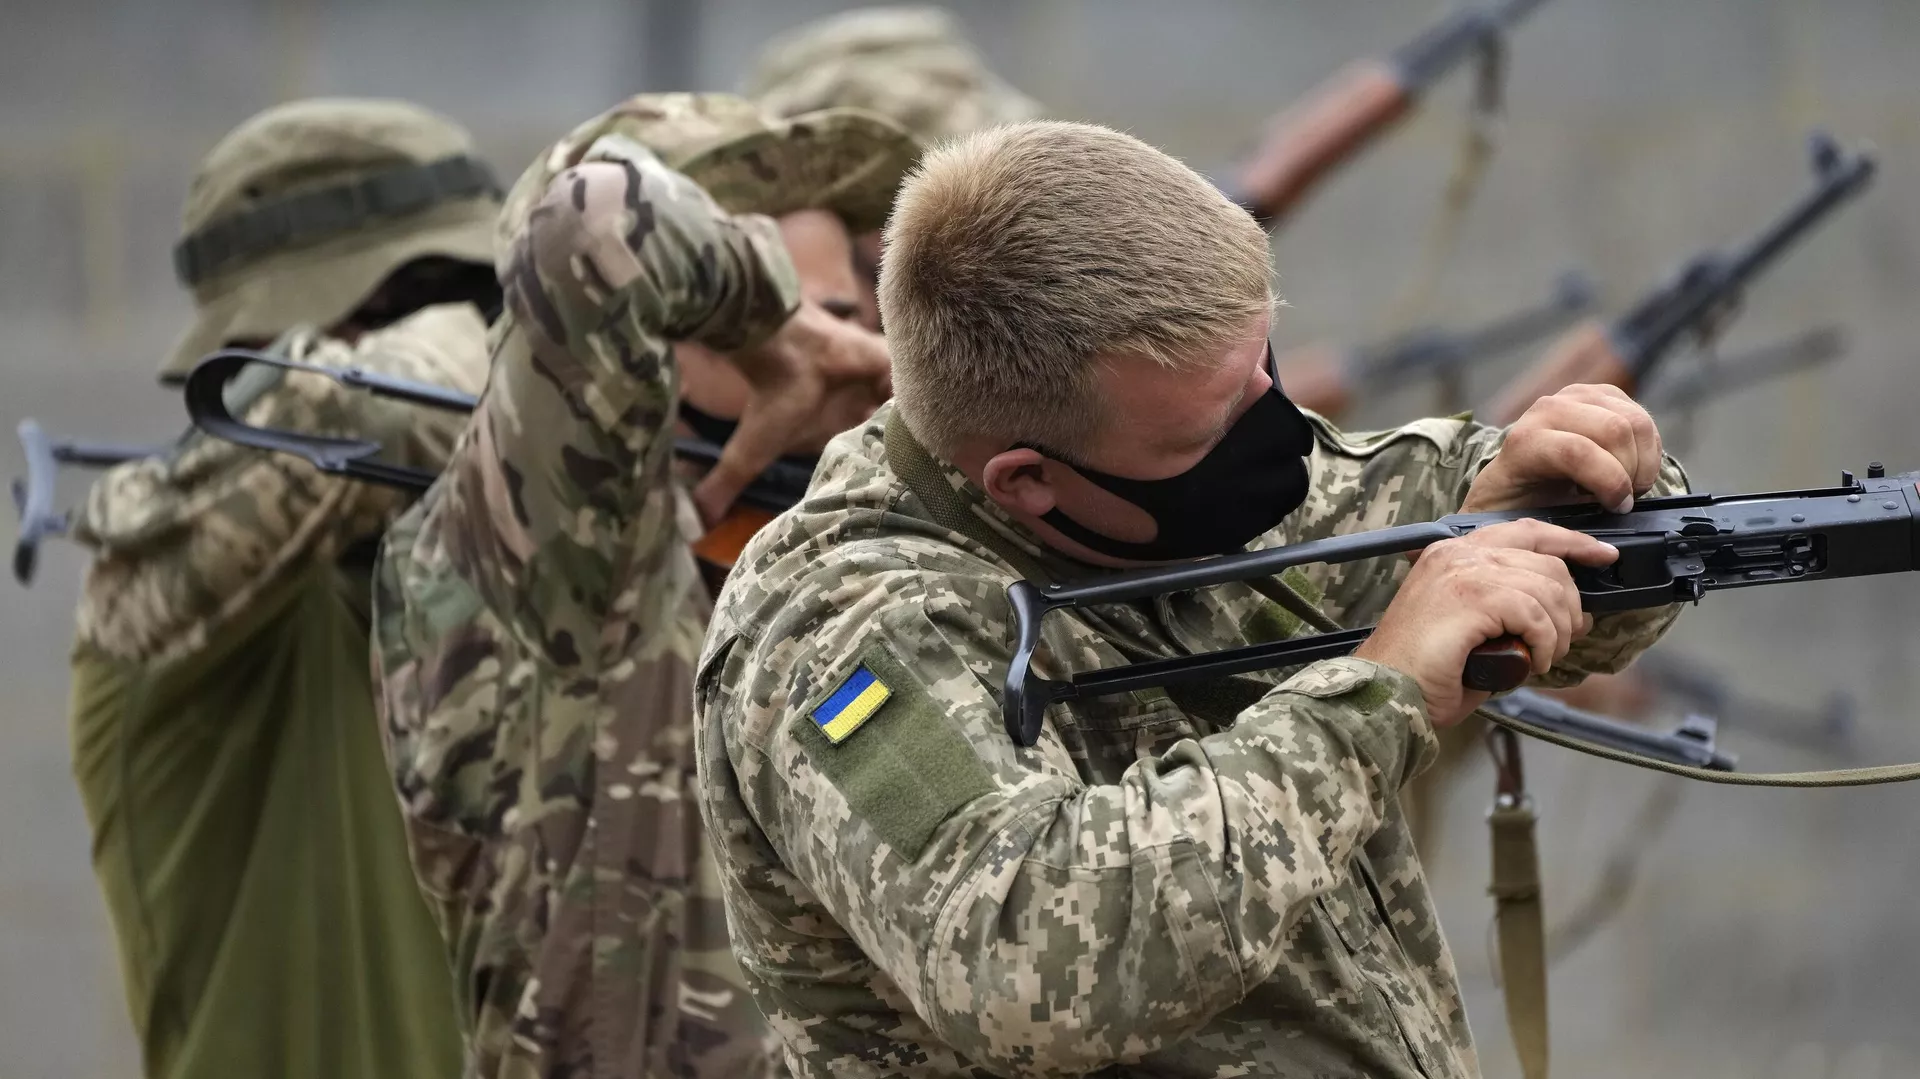 Ukraine Sees Little Hope of Mobilizing 500K Fresh Troops as Western Arms Aid Stalls